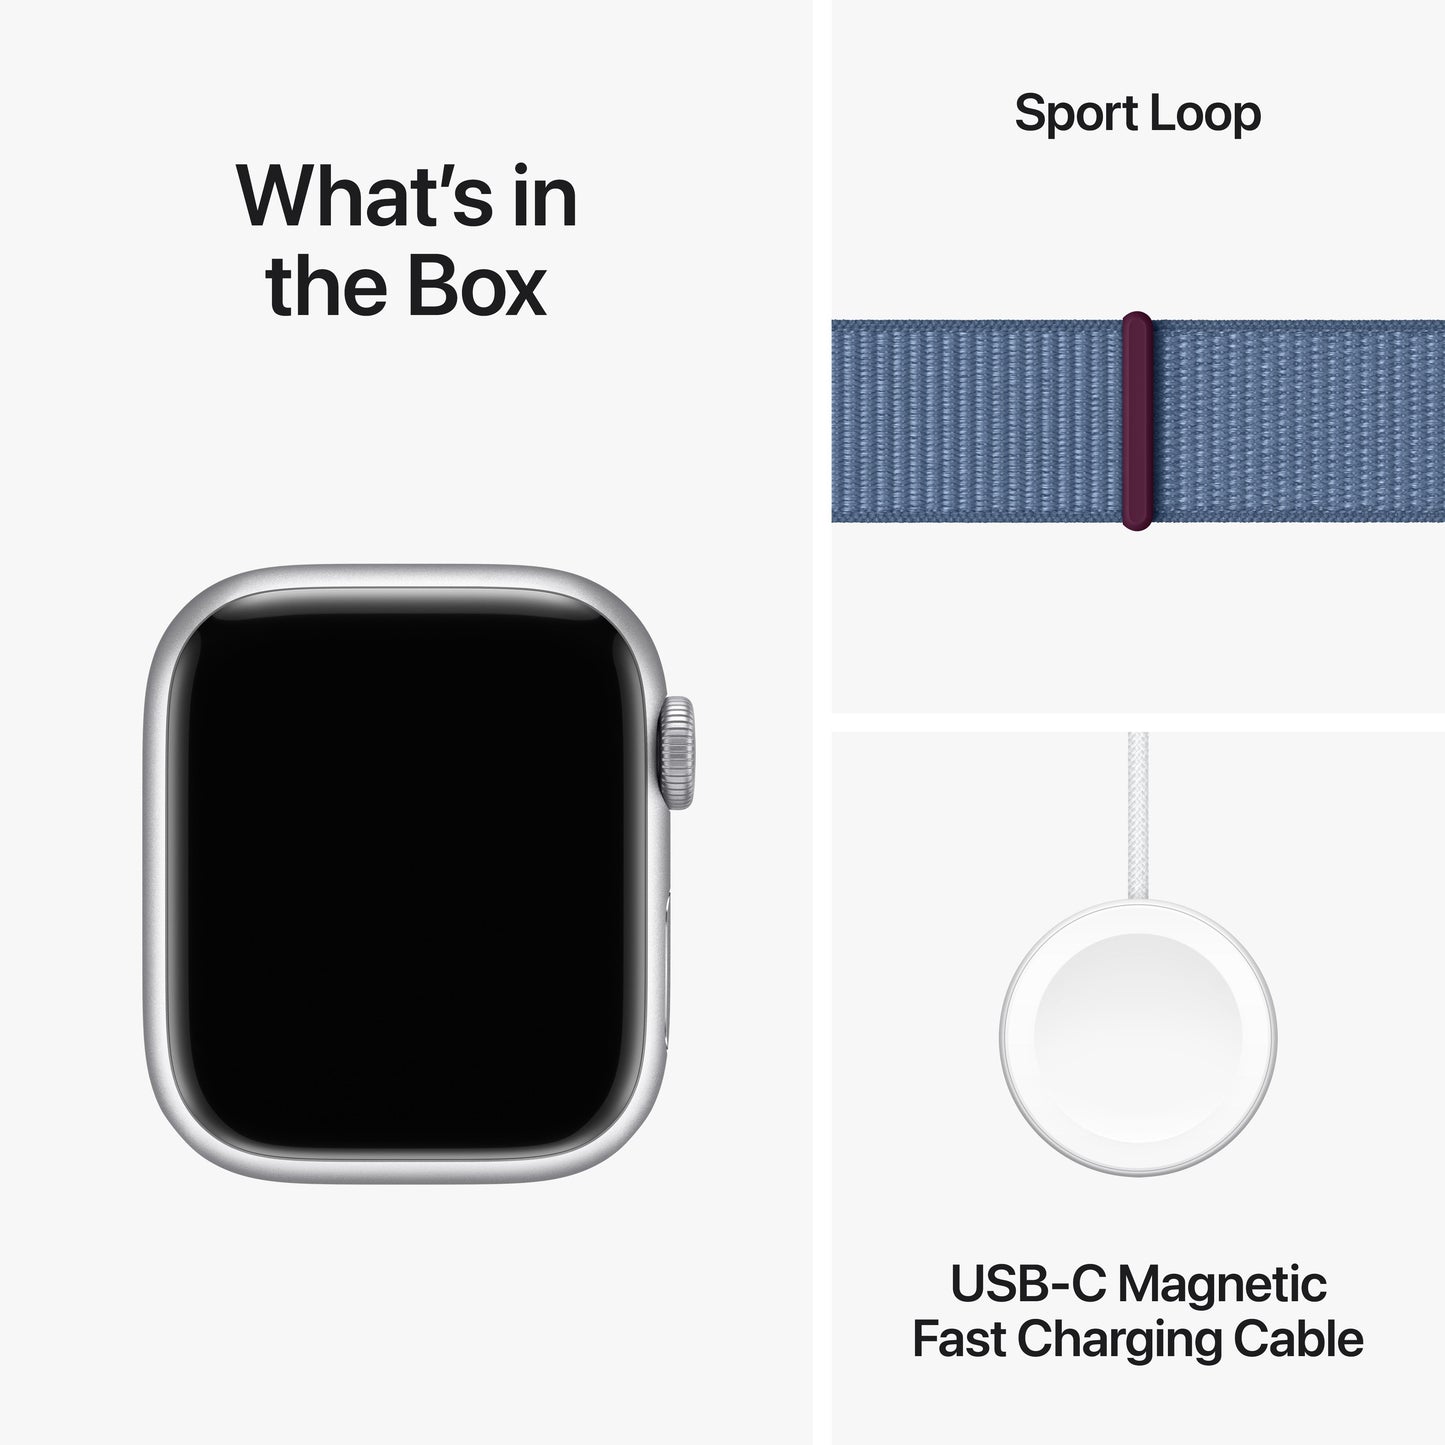 Apple Watch Series 9 GPS + Cellular 41mm Silver Aluminum Case with Winter Blue Sport Loop